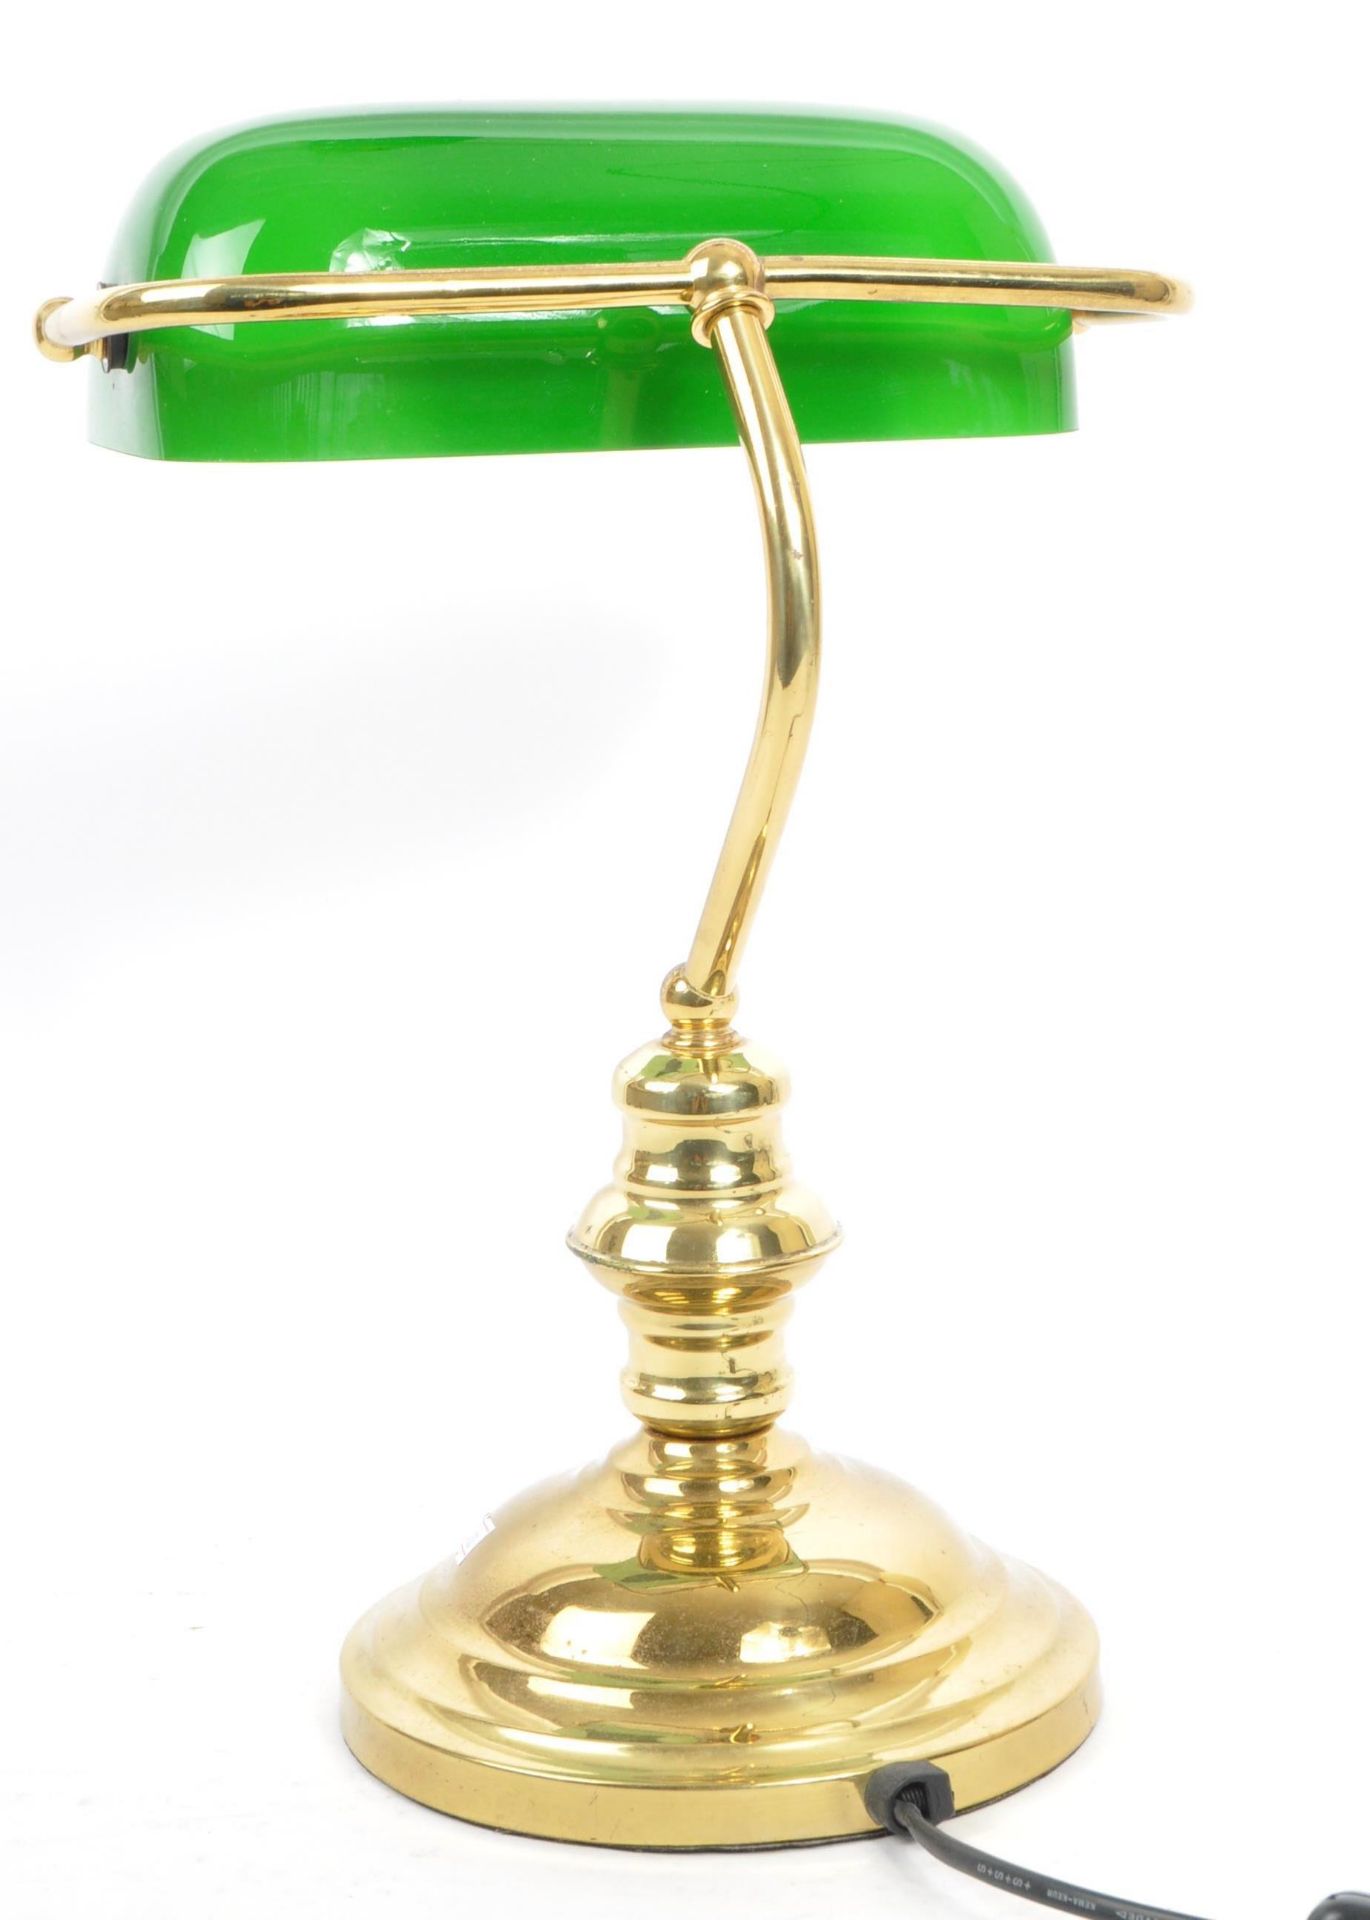 RETRO LATE 20TH CENTURY REPRODUCTION BANKER'S LAMP - Image 4 of 5